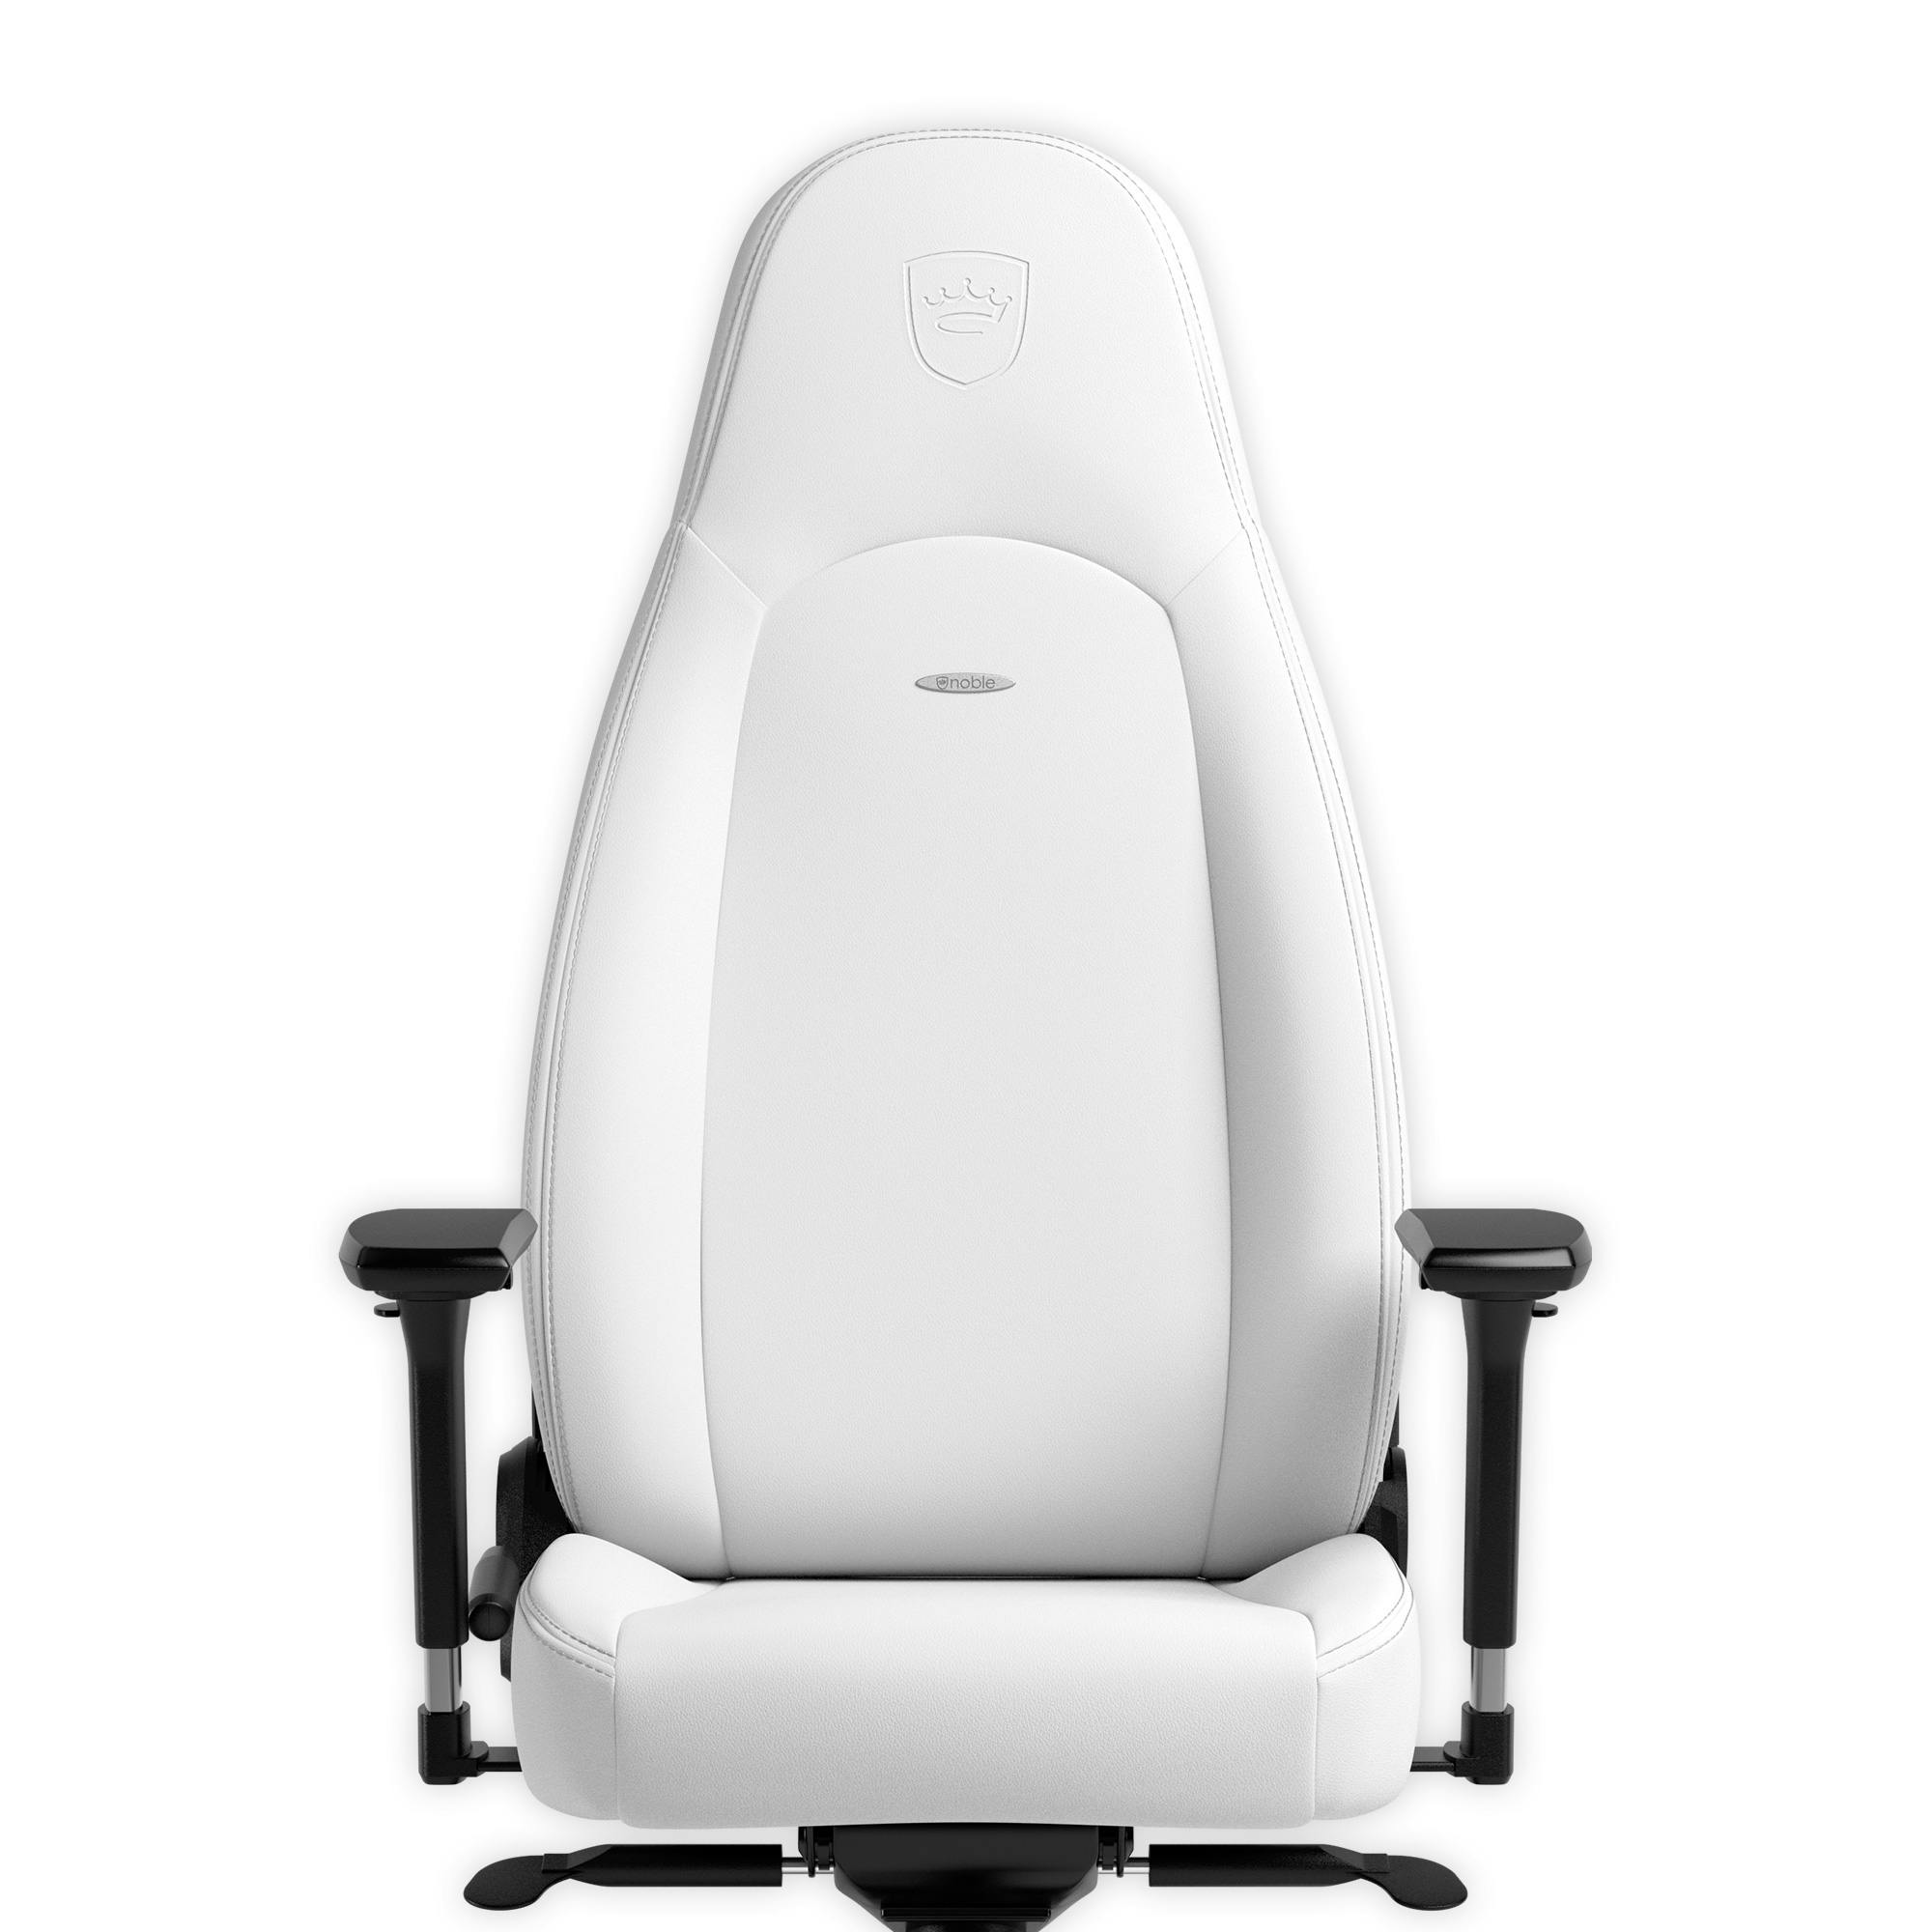 noblechairs - ICON White Edition